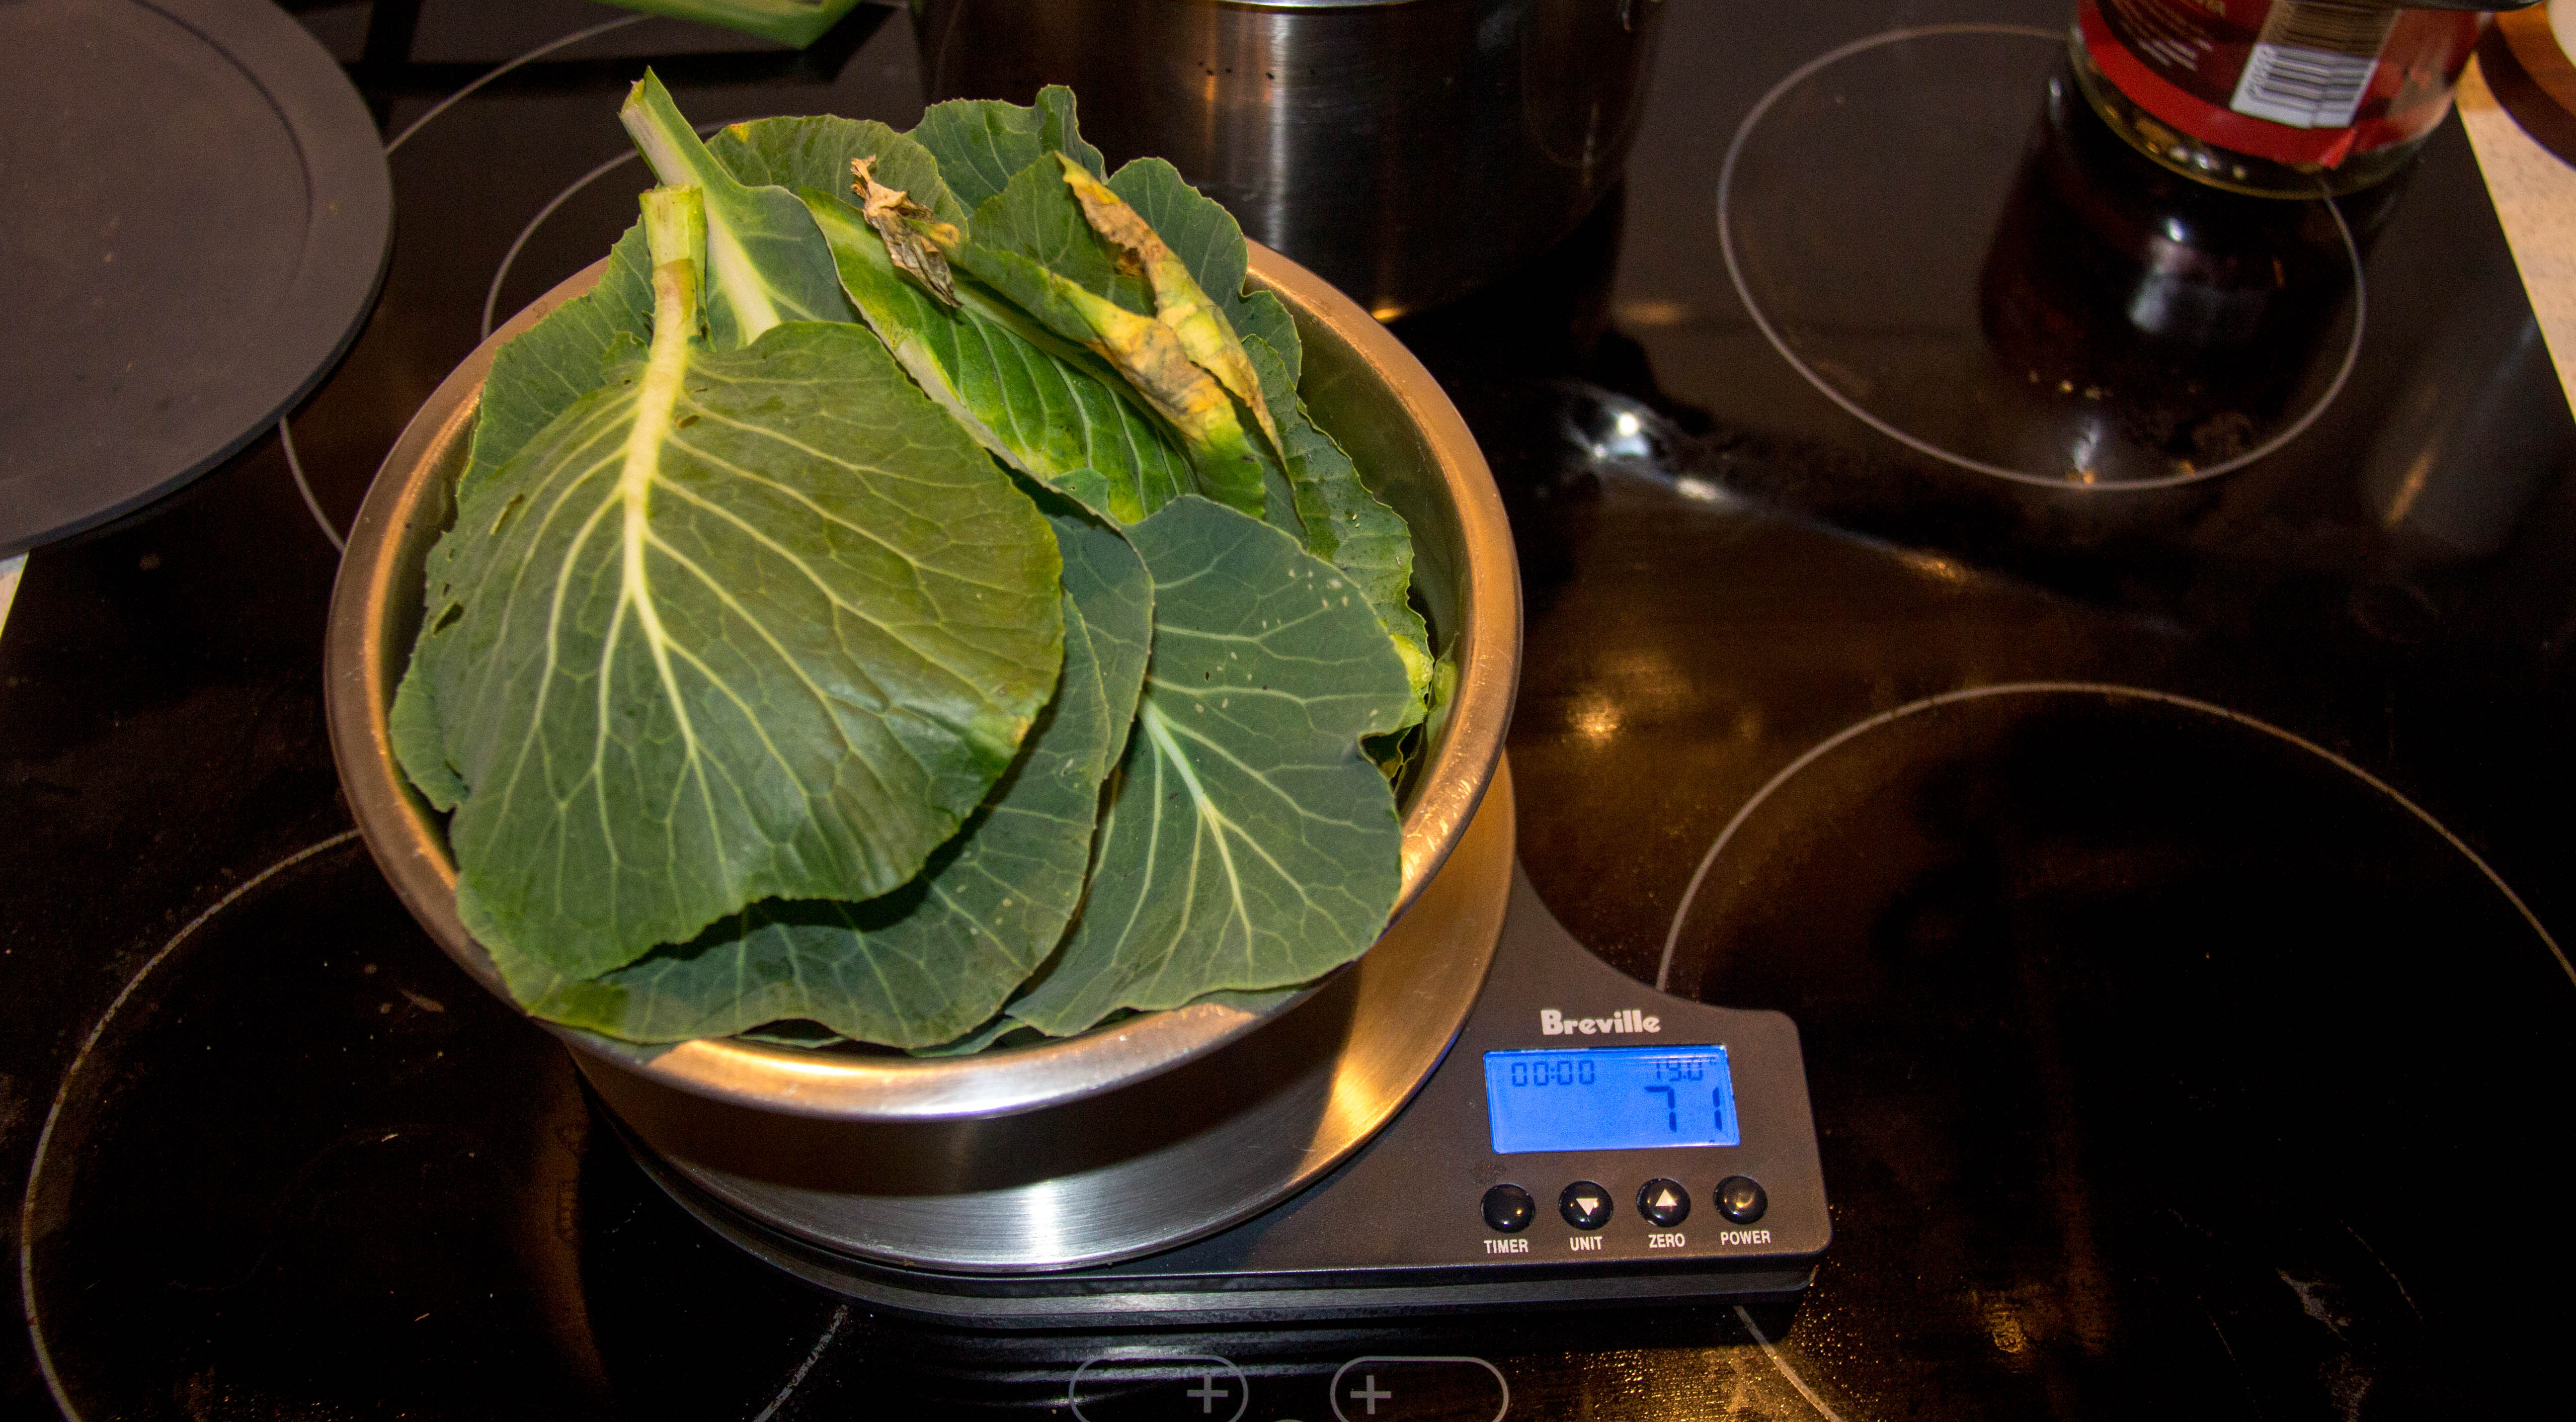 The great thing about store-bought re-grown or home-grown is how you can harvest the vegetable as and when you need it! Harvested 71 g of store-bought re-grown cabbage.